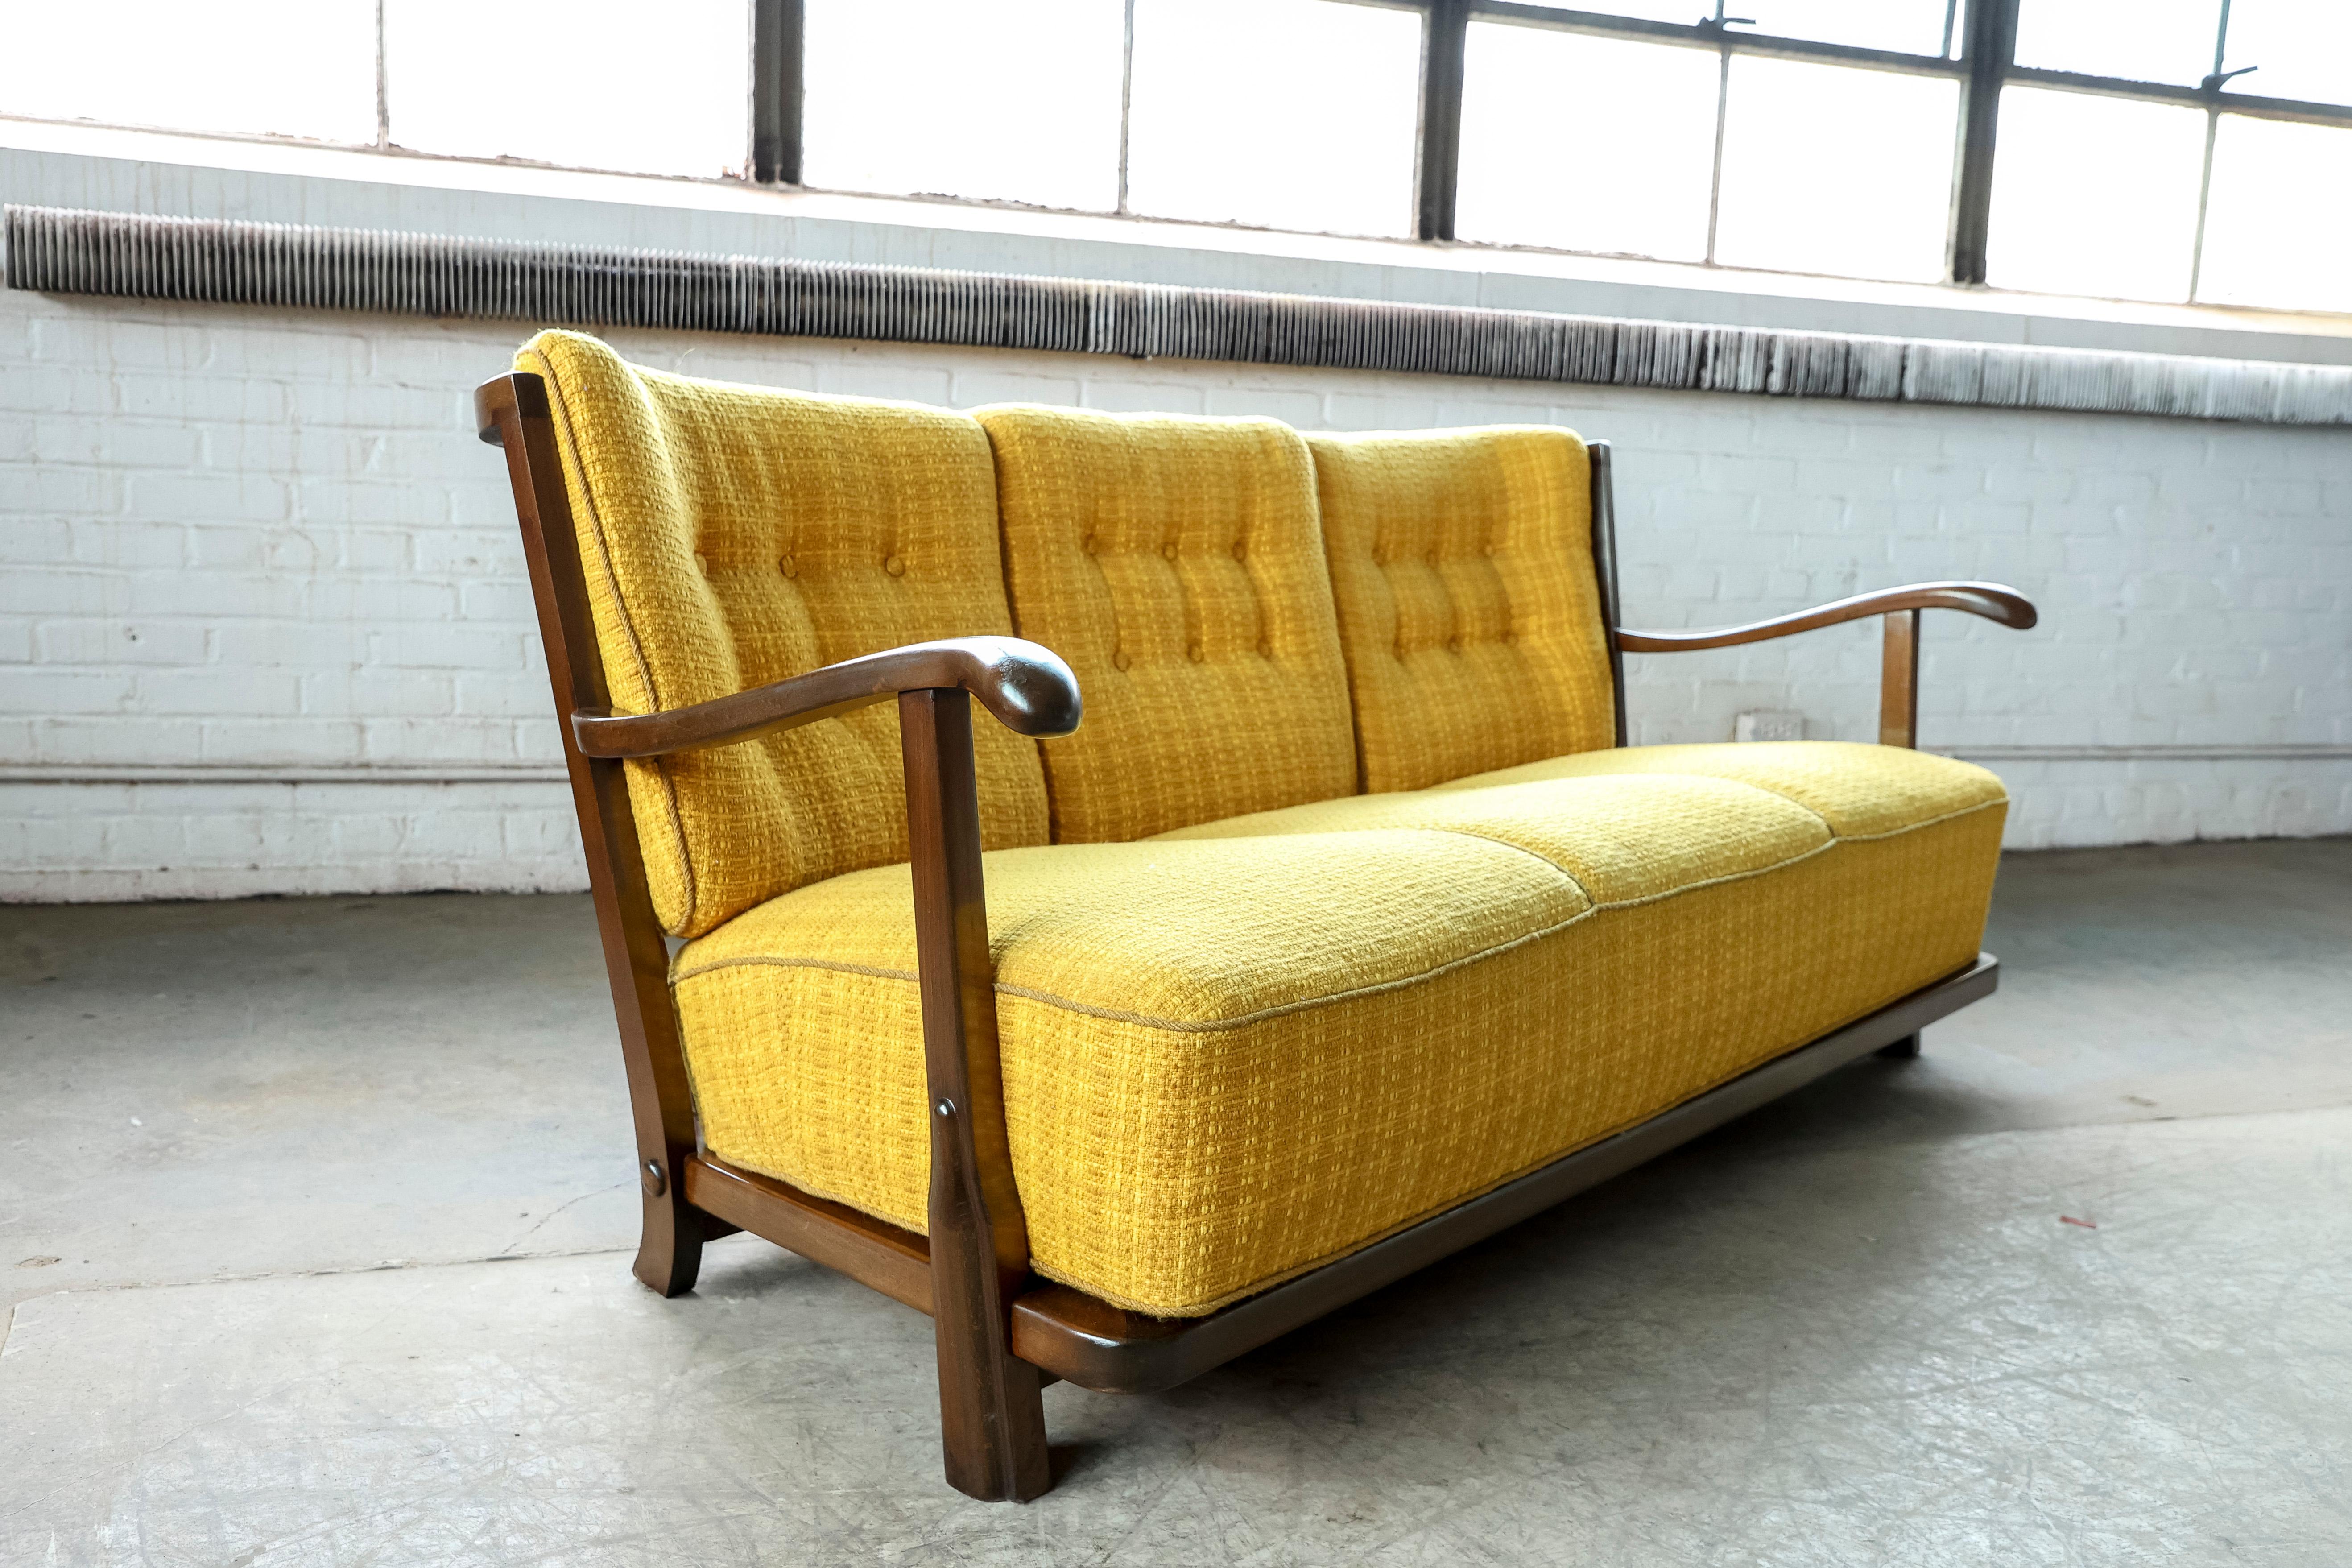 Rare and sought after sofa model 1594 made by Fritz Hansen, Denmark in the early 1940s. The sofa was featured in Fritz Hansen's production catalog in 1942 page 6. It's a magnificent piece with low slung lines all built on a frame of stained solid